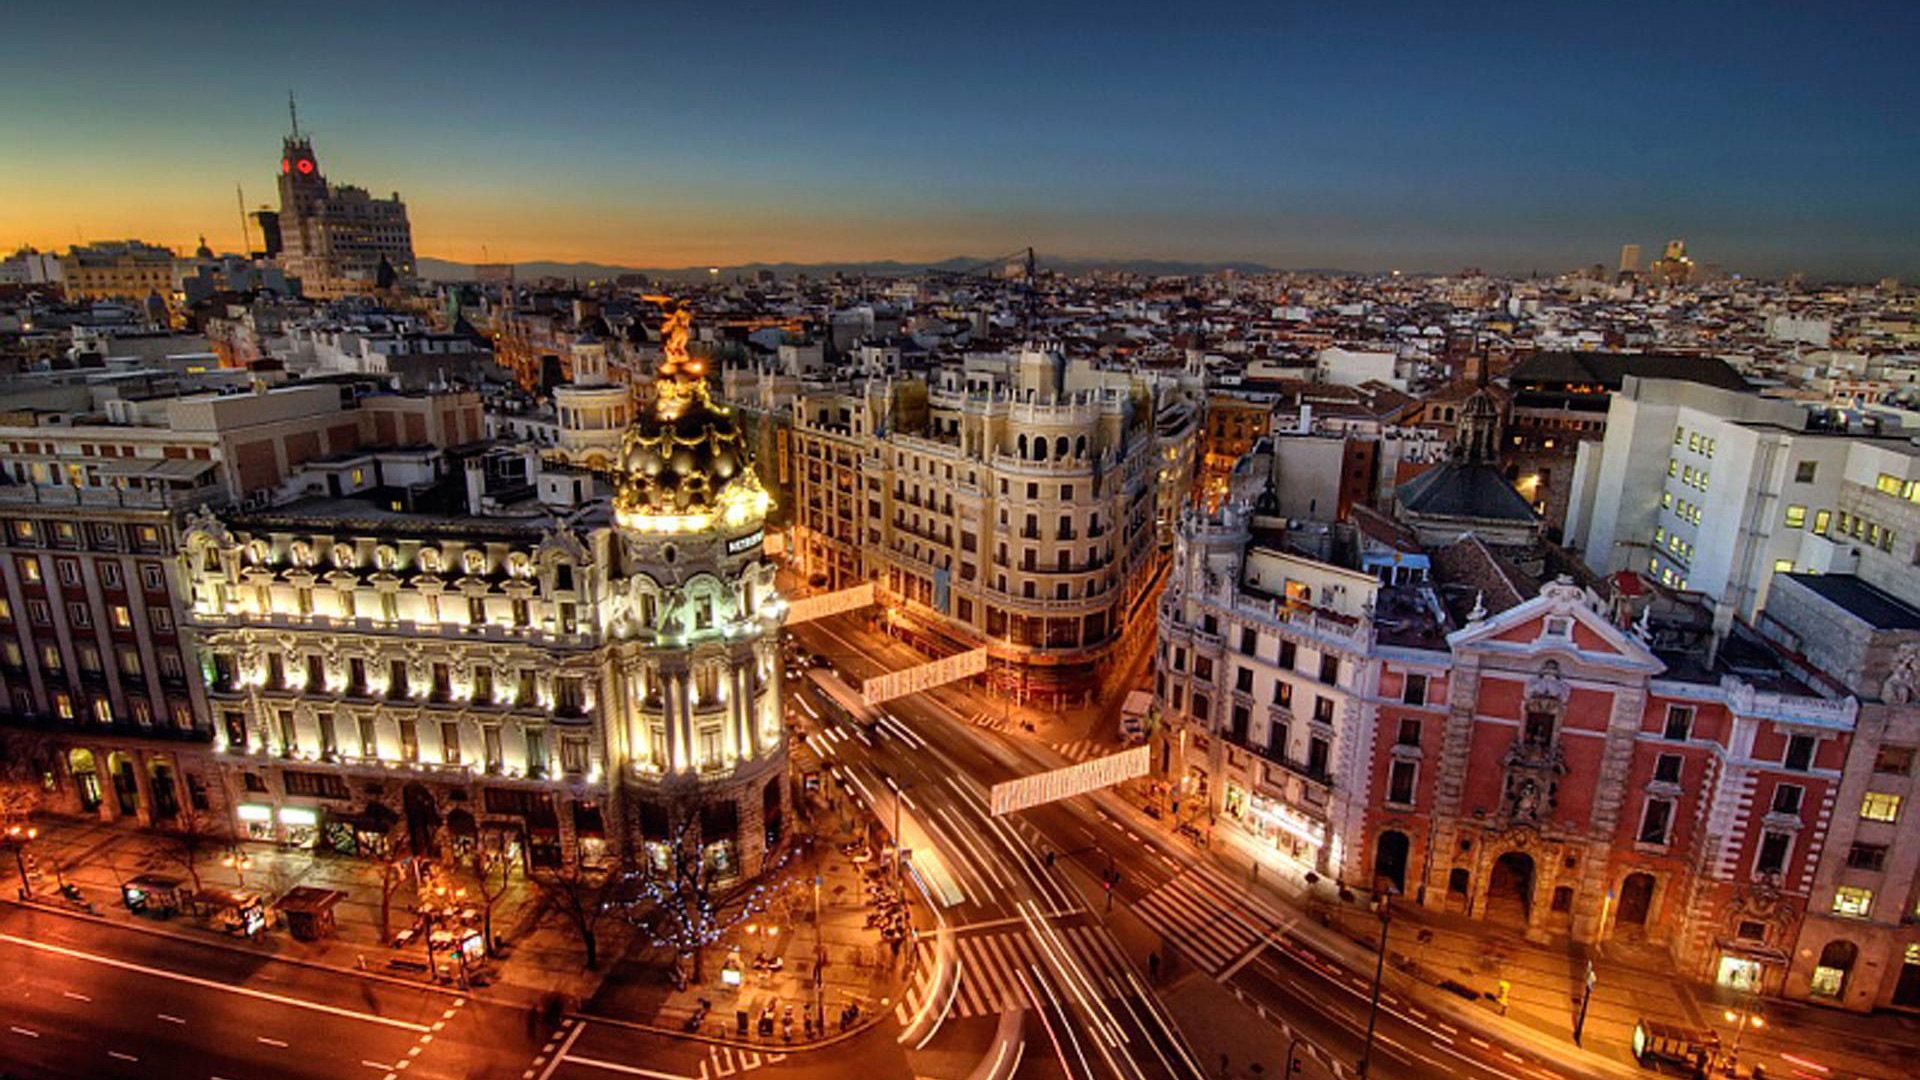 With PayPorter, you can make fast, easy and safe money transfers to Spain at the most affordable prices!